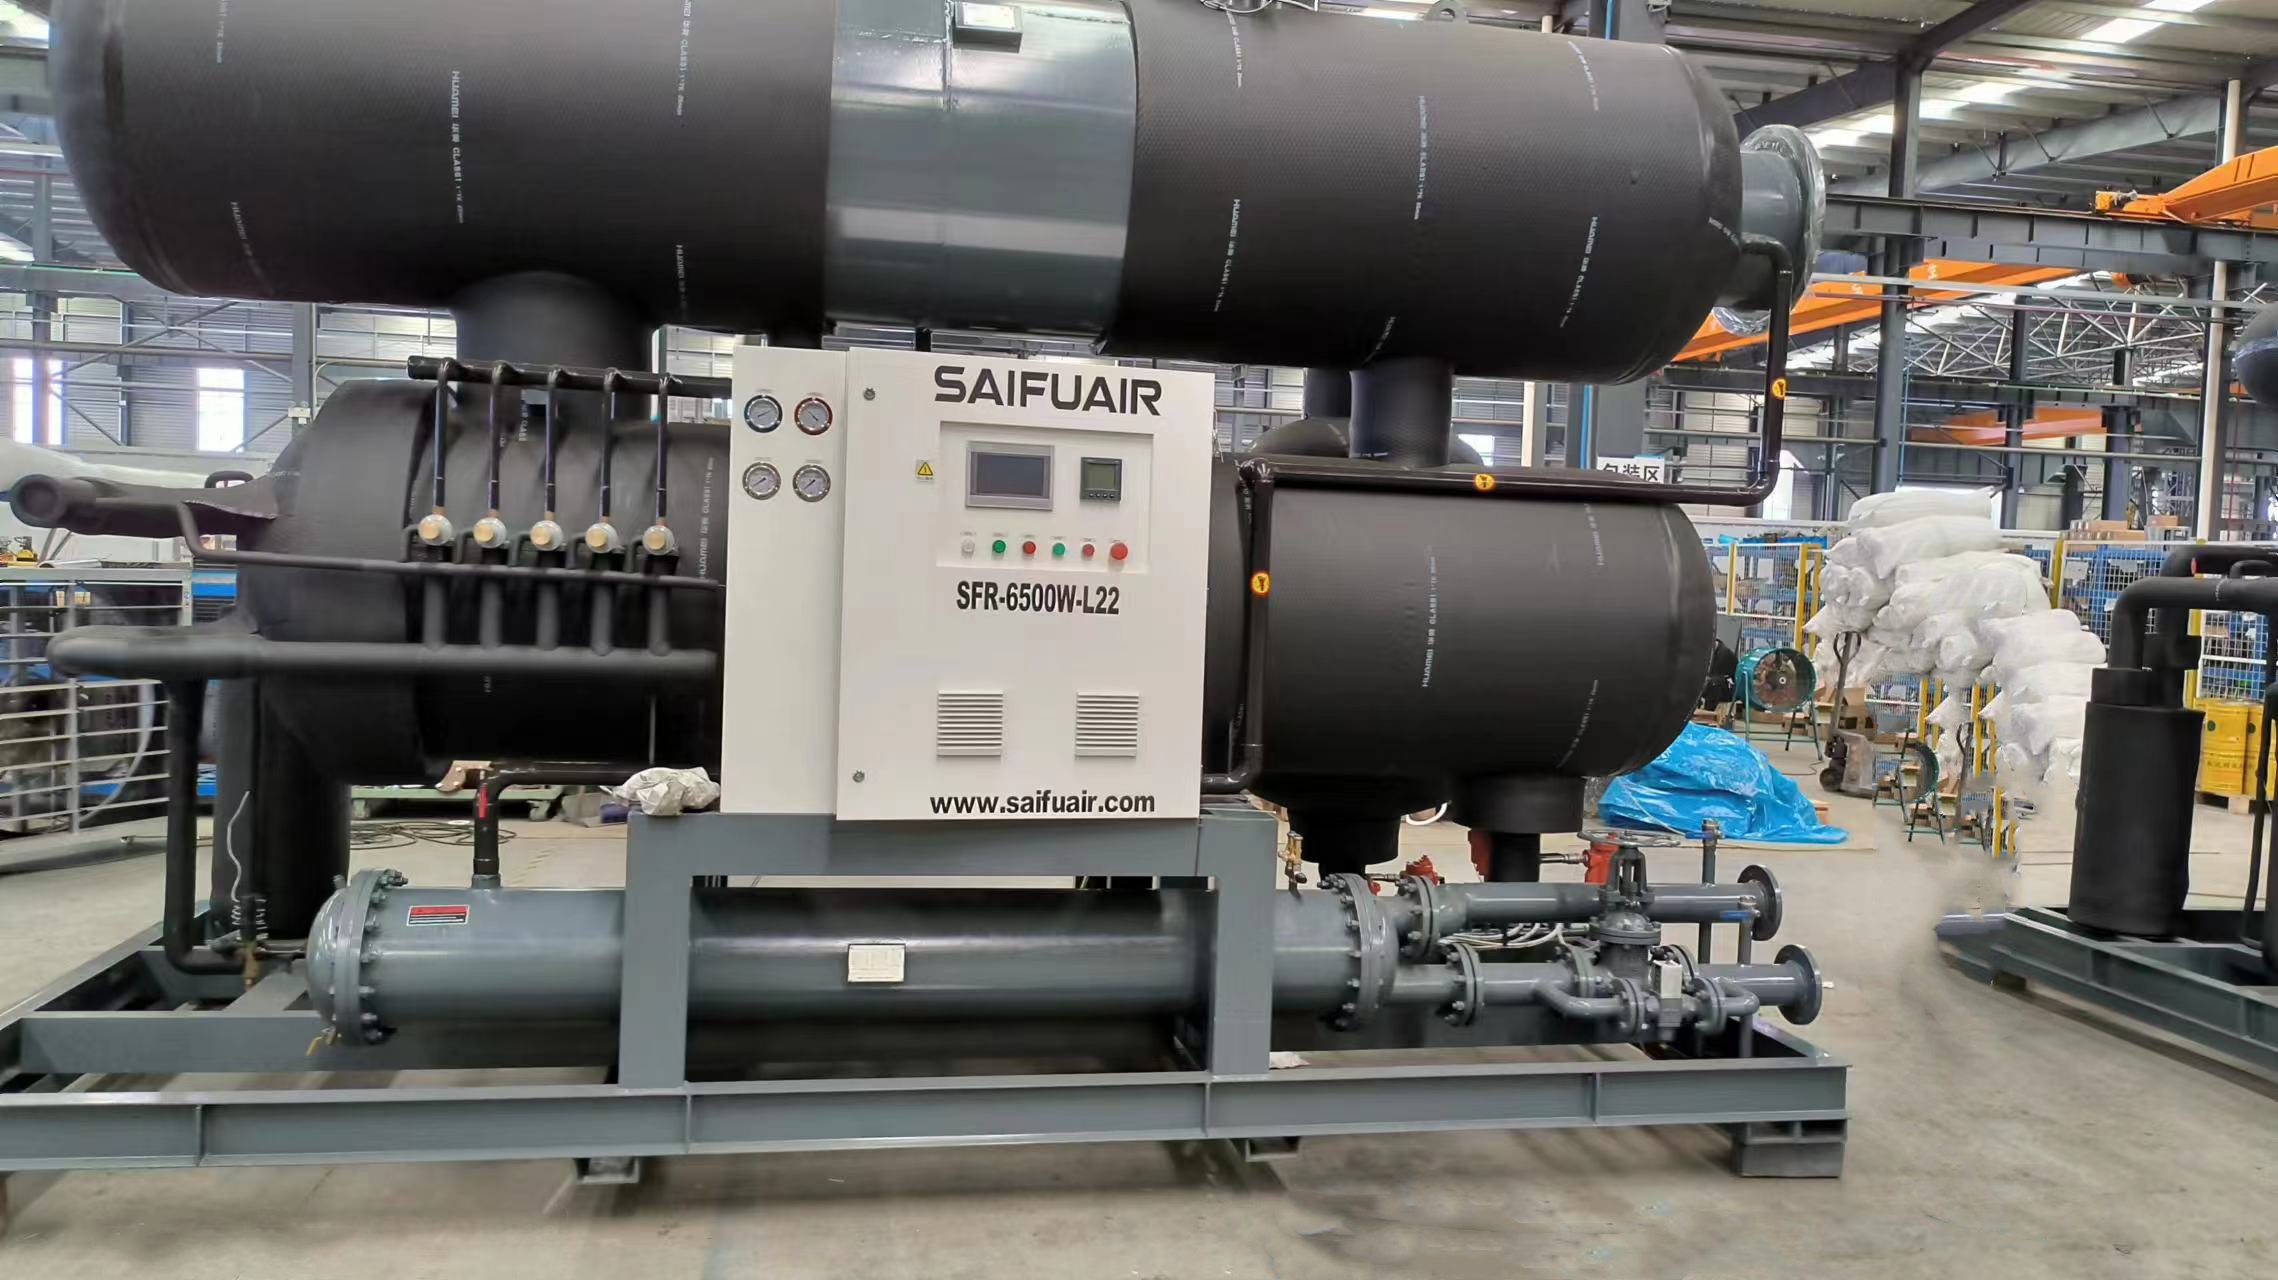 SAIFUAIR's dry machines will soon be delivered to the recycled fiber enterprise